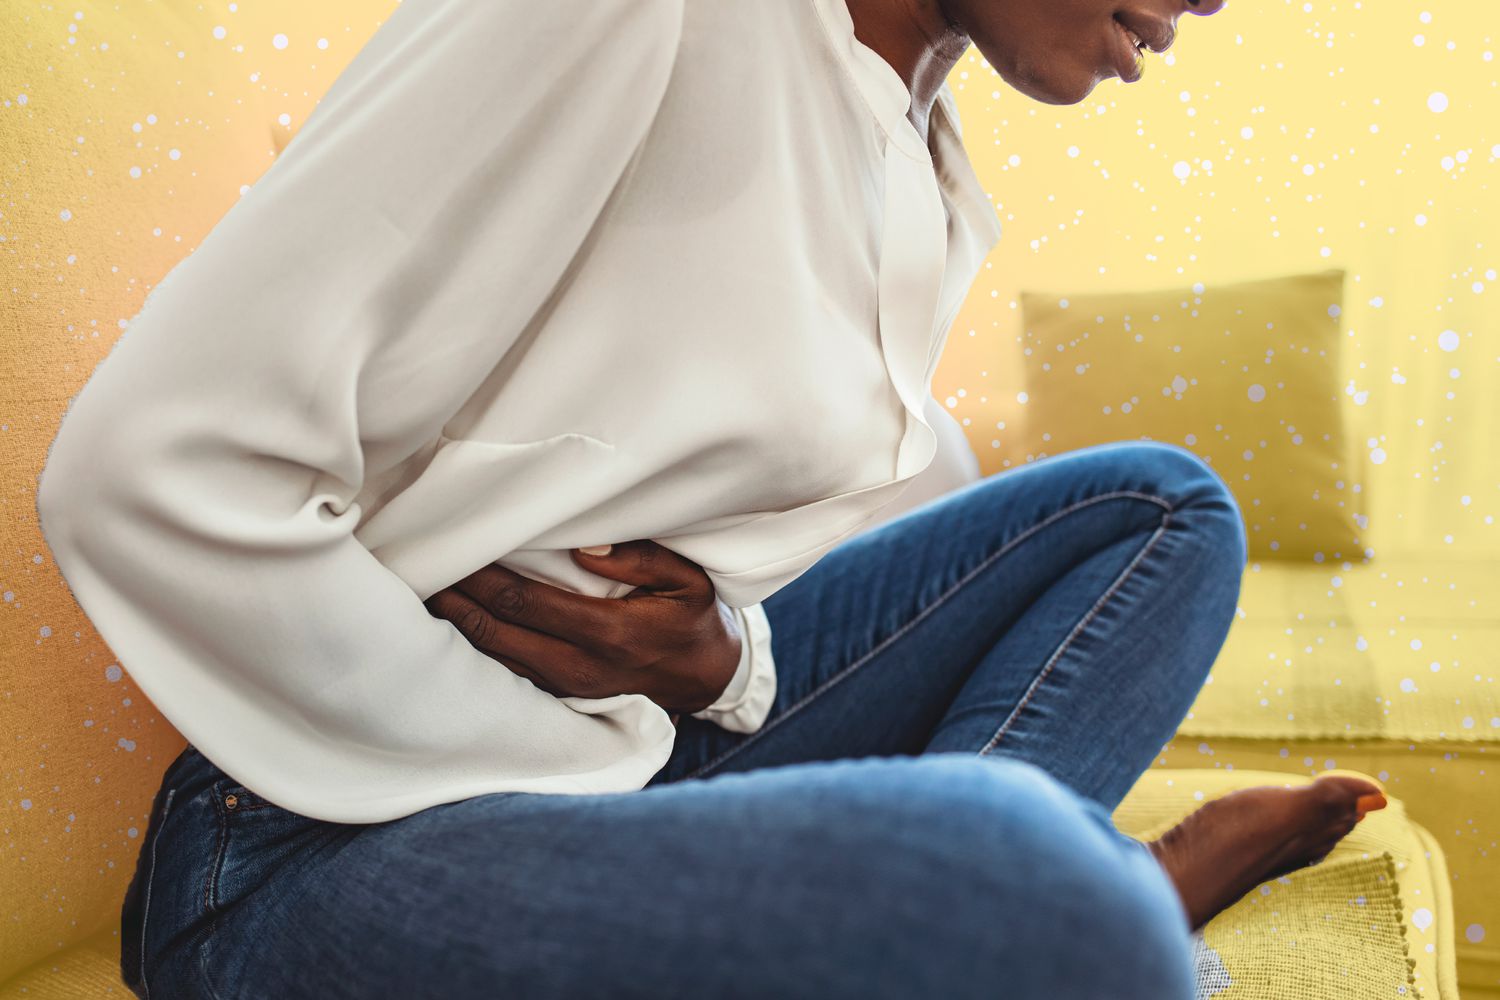 person crouching over with stomach pain on a designed background